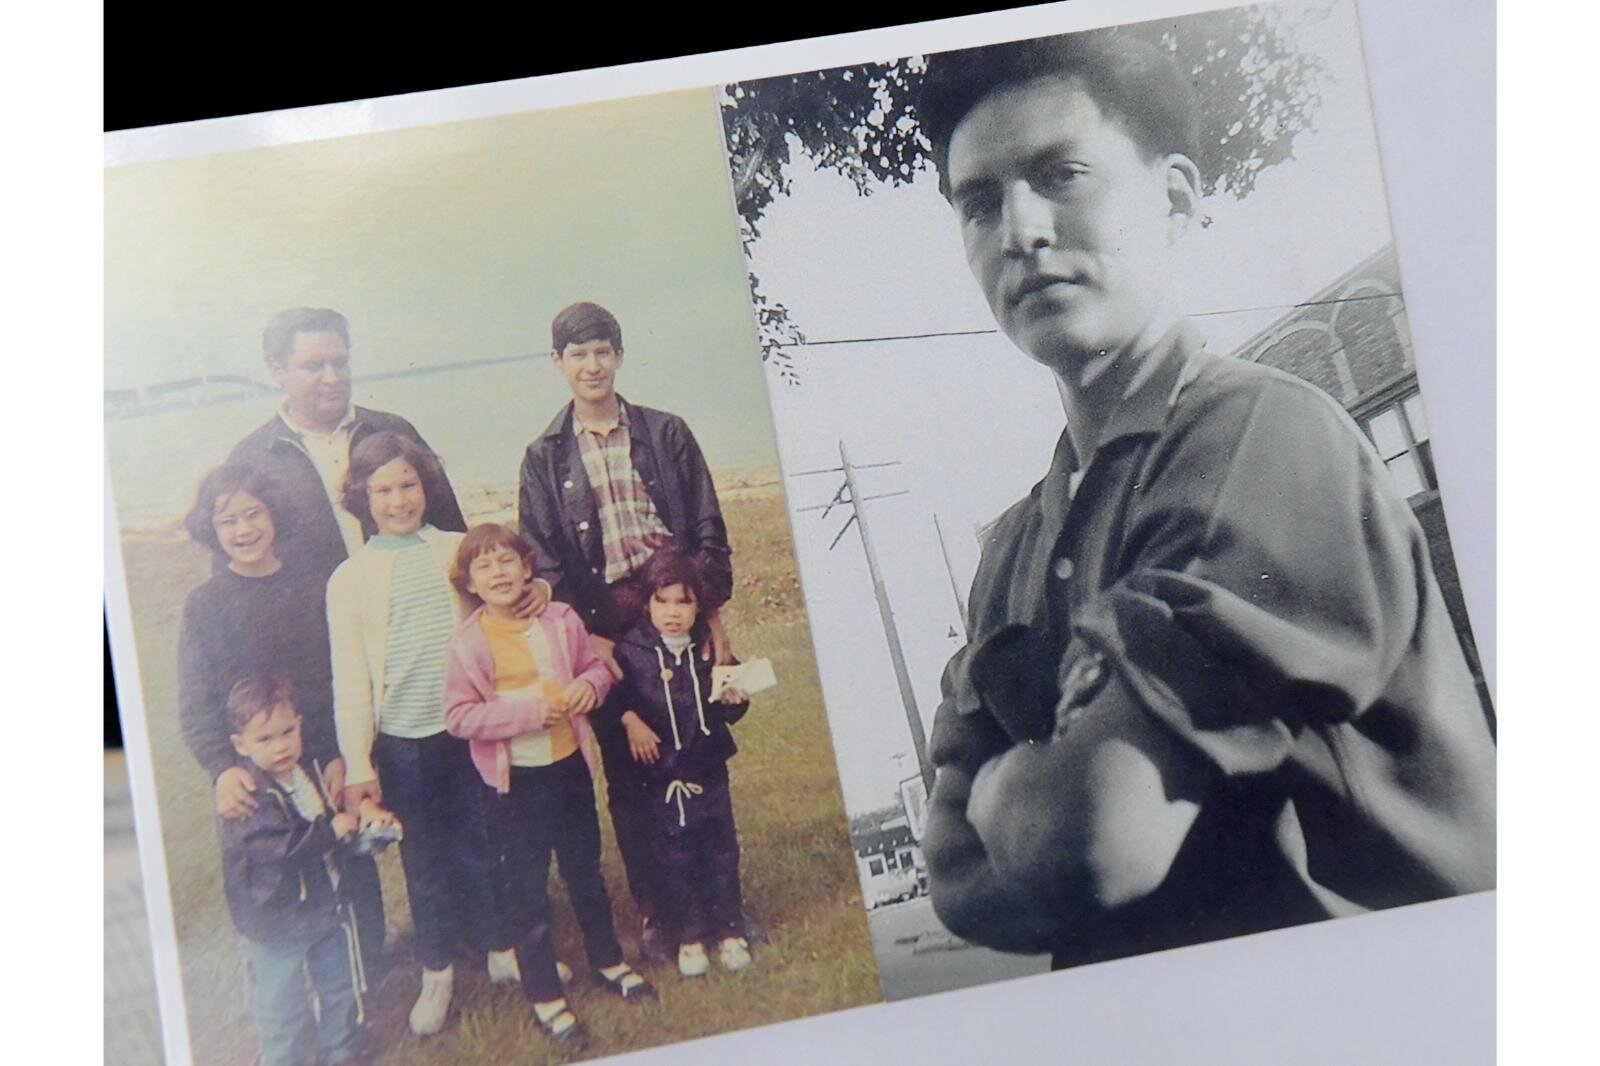 Photos of Sharon Skutt’s family, left, and her father